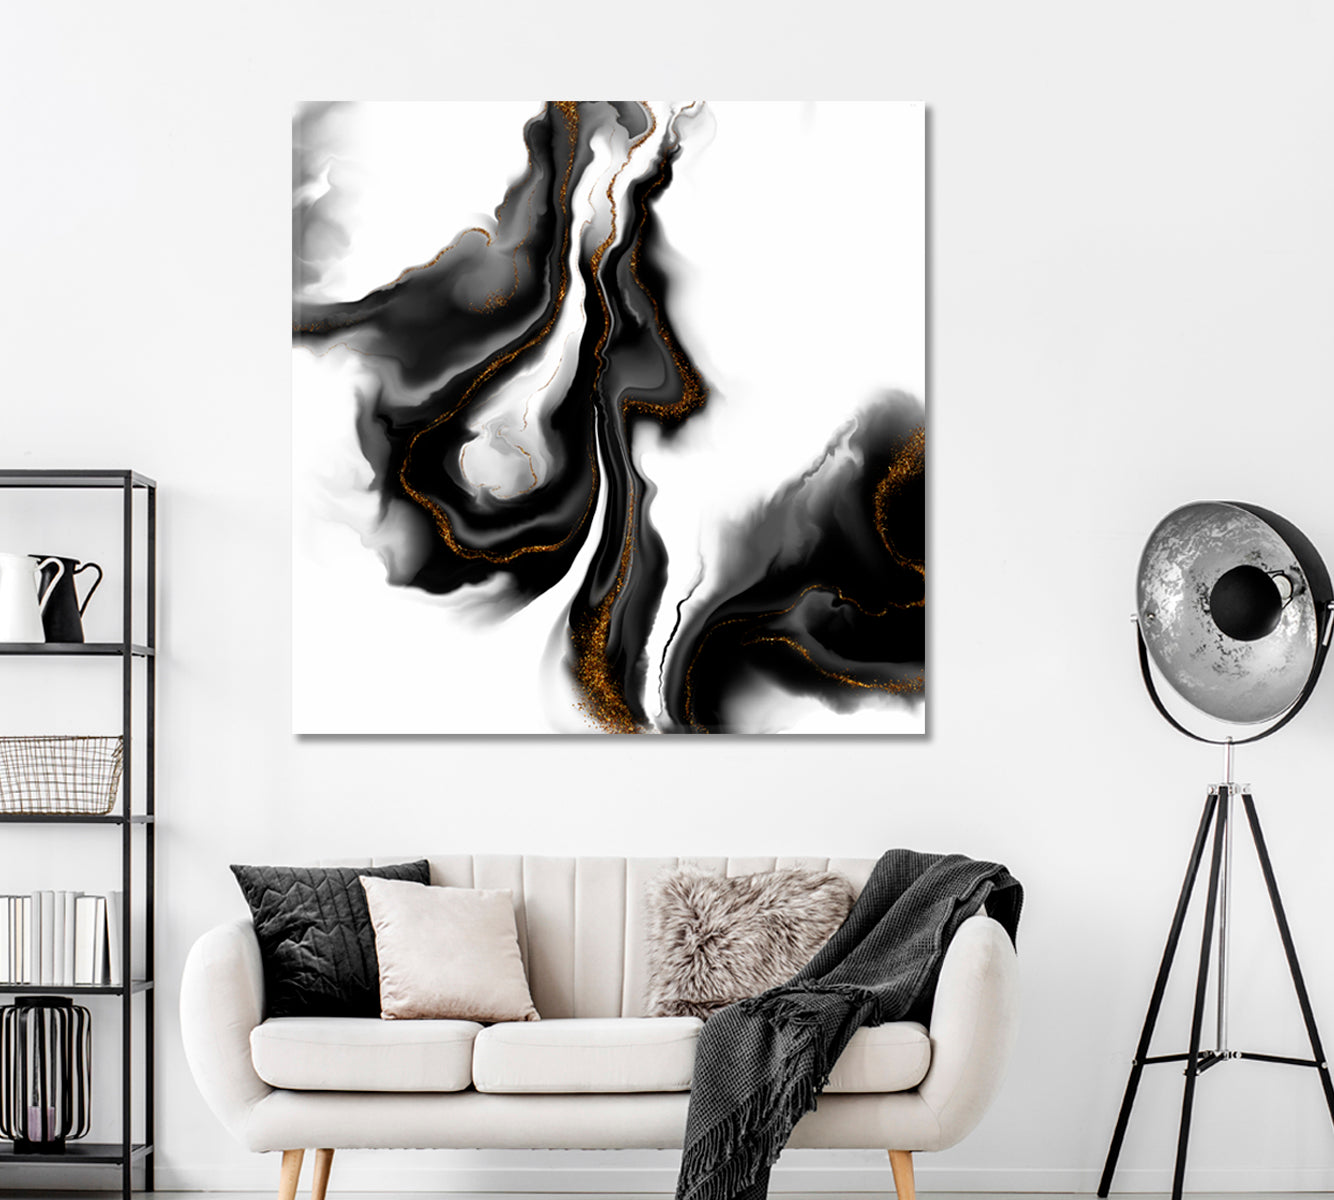 Luxury Creative Black Abstract Pattern Canvas Print ArtLexy 1 Panel 12"x12" inches 